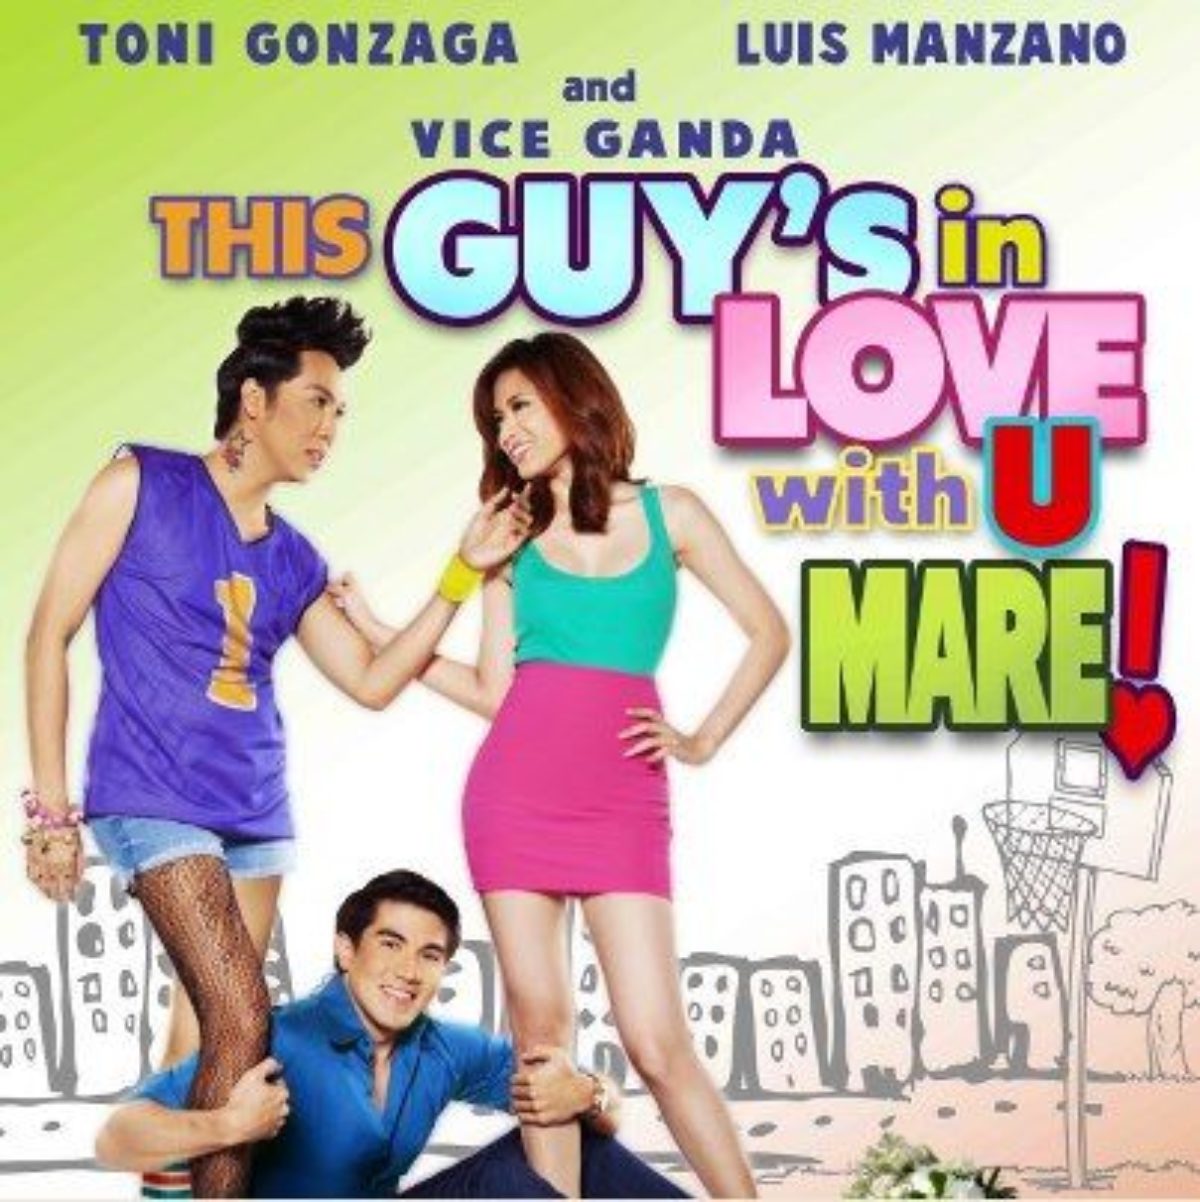 This Guy S In Love With You Mare First Day Box Office Gross Reached P23 Million Philippine News